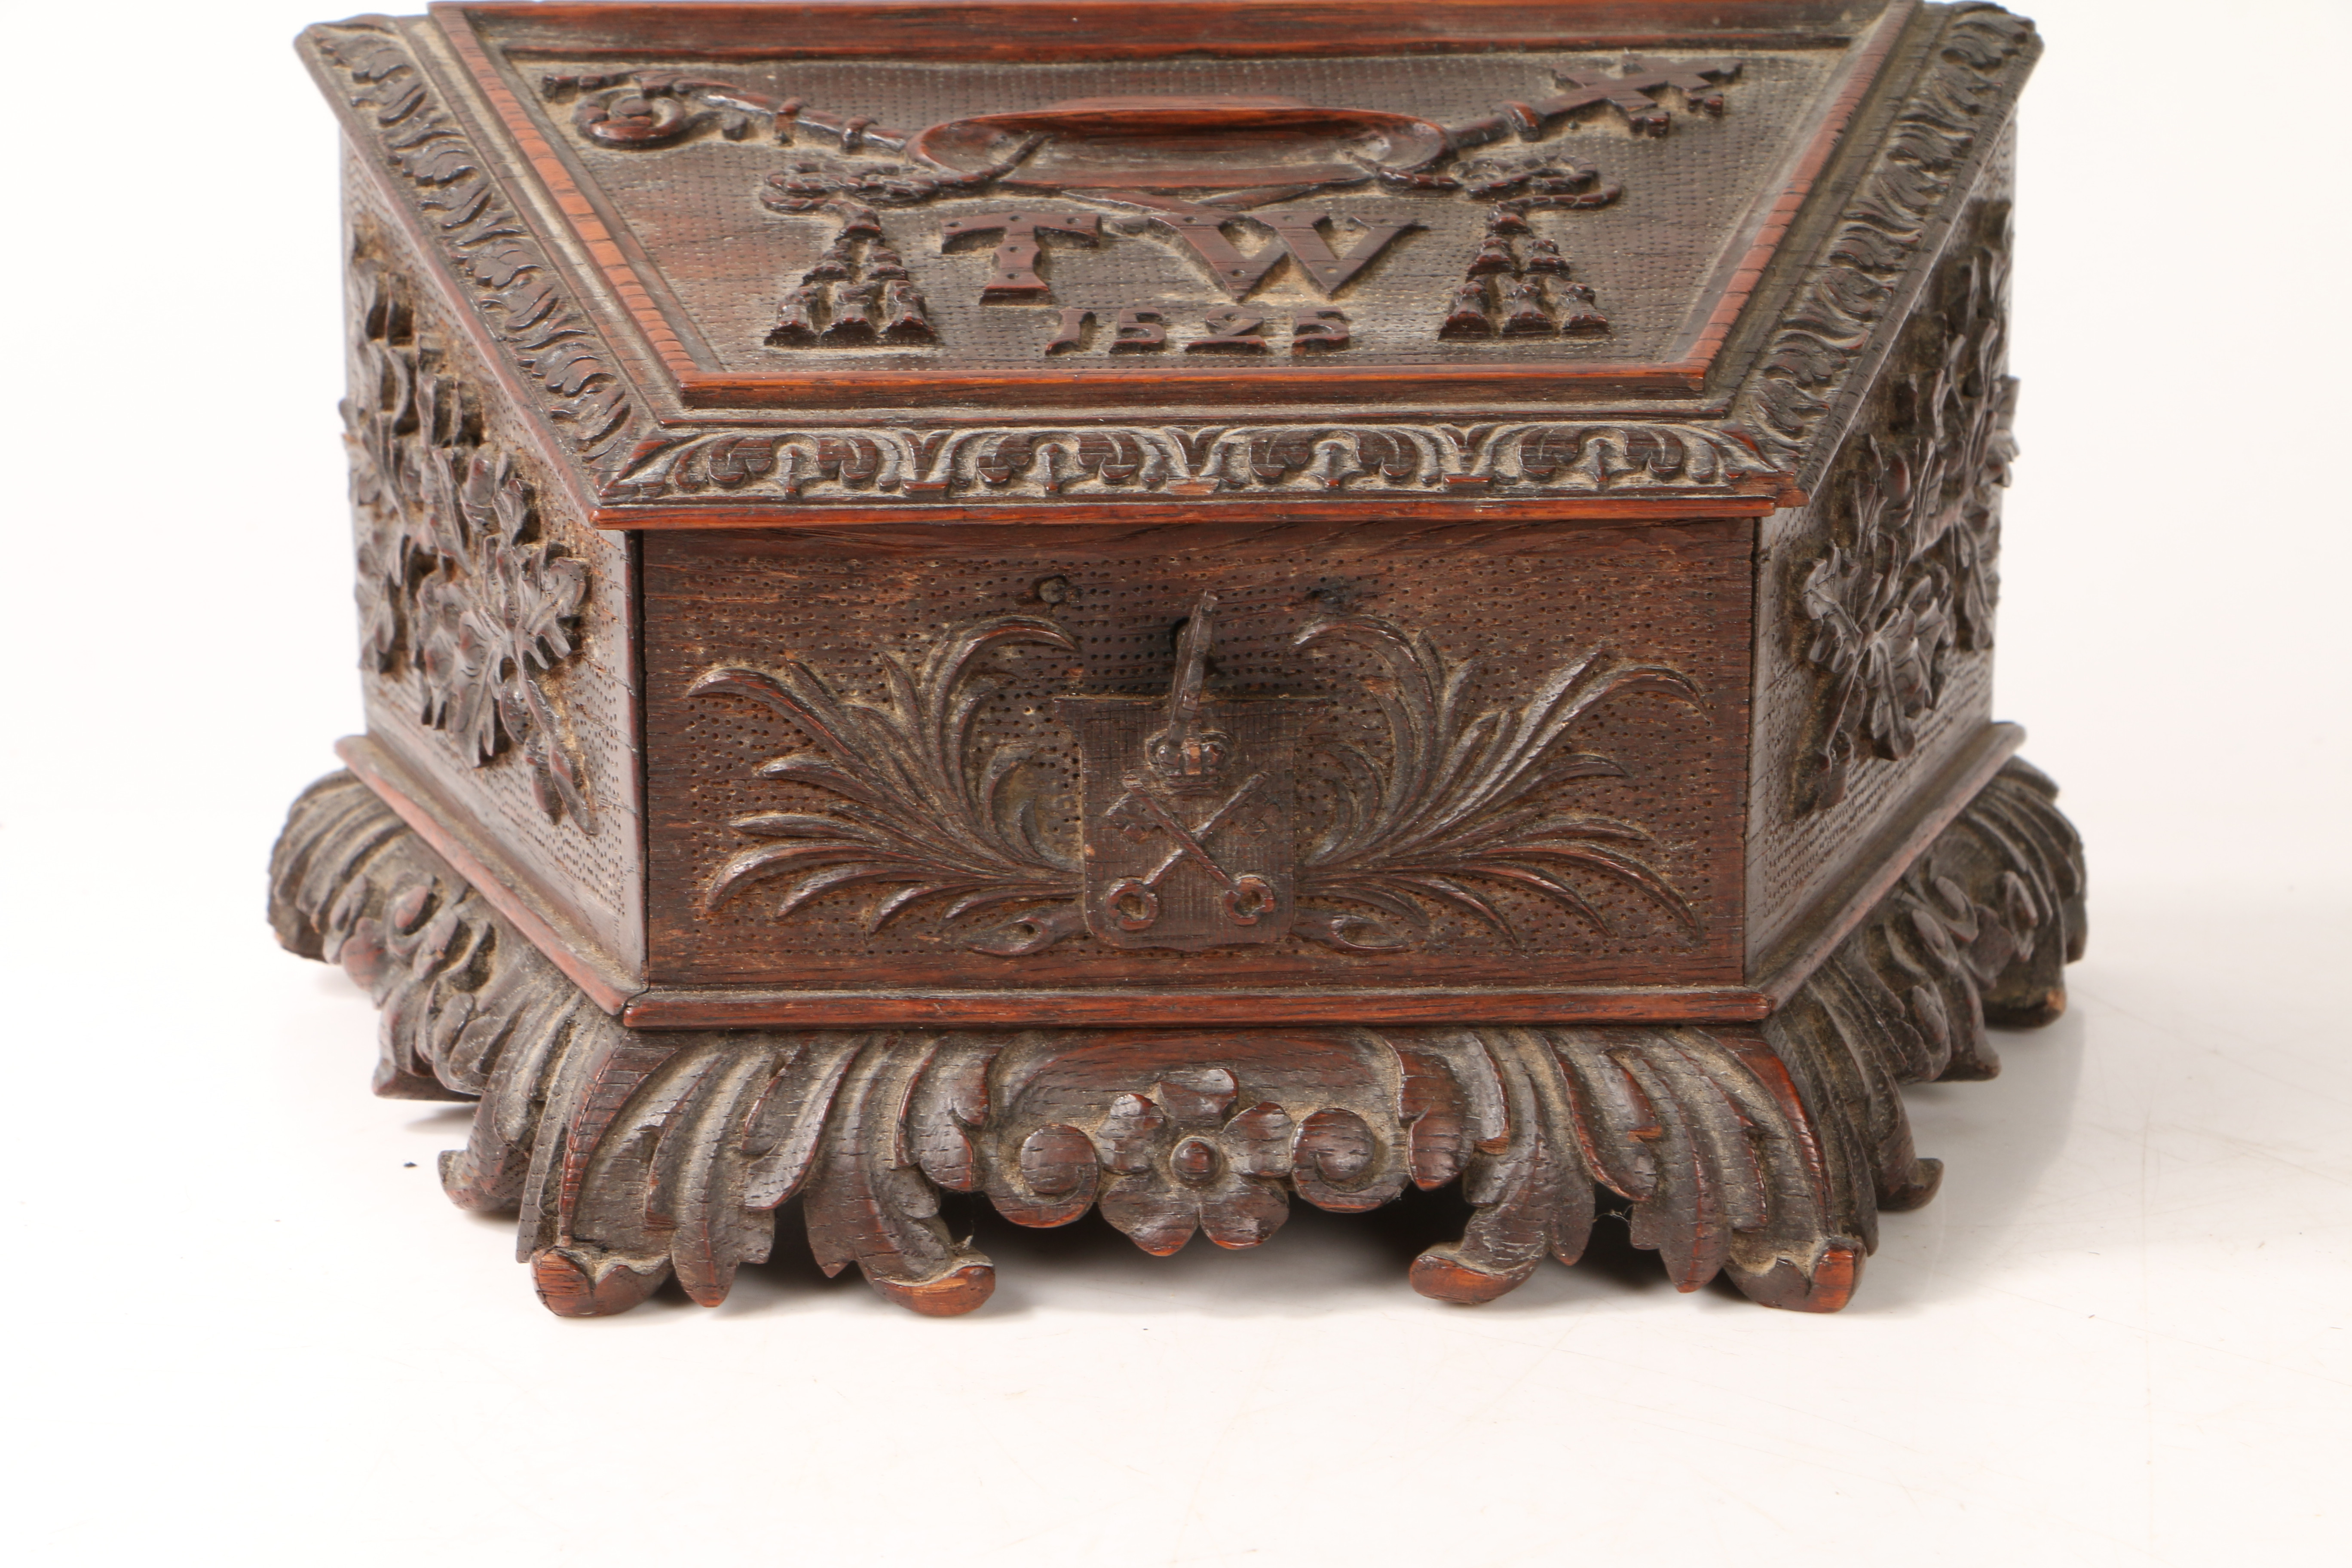 CHRIST CHURCH INTEREST - A 19TH CENTURY CARVED OAK BOX. - Image 2 of 10